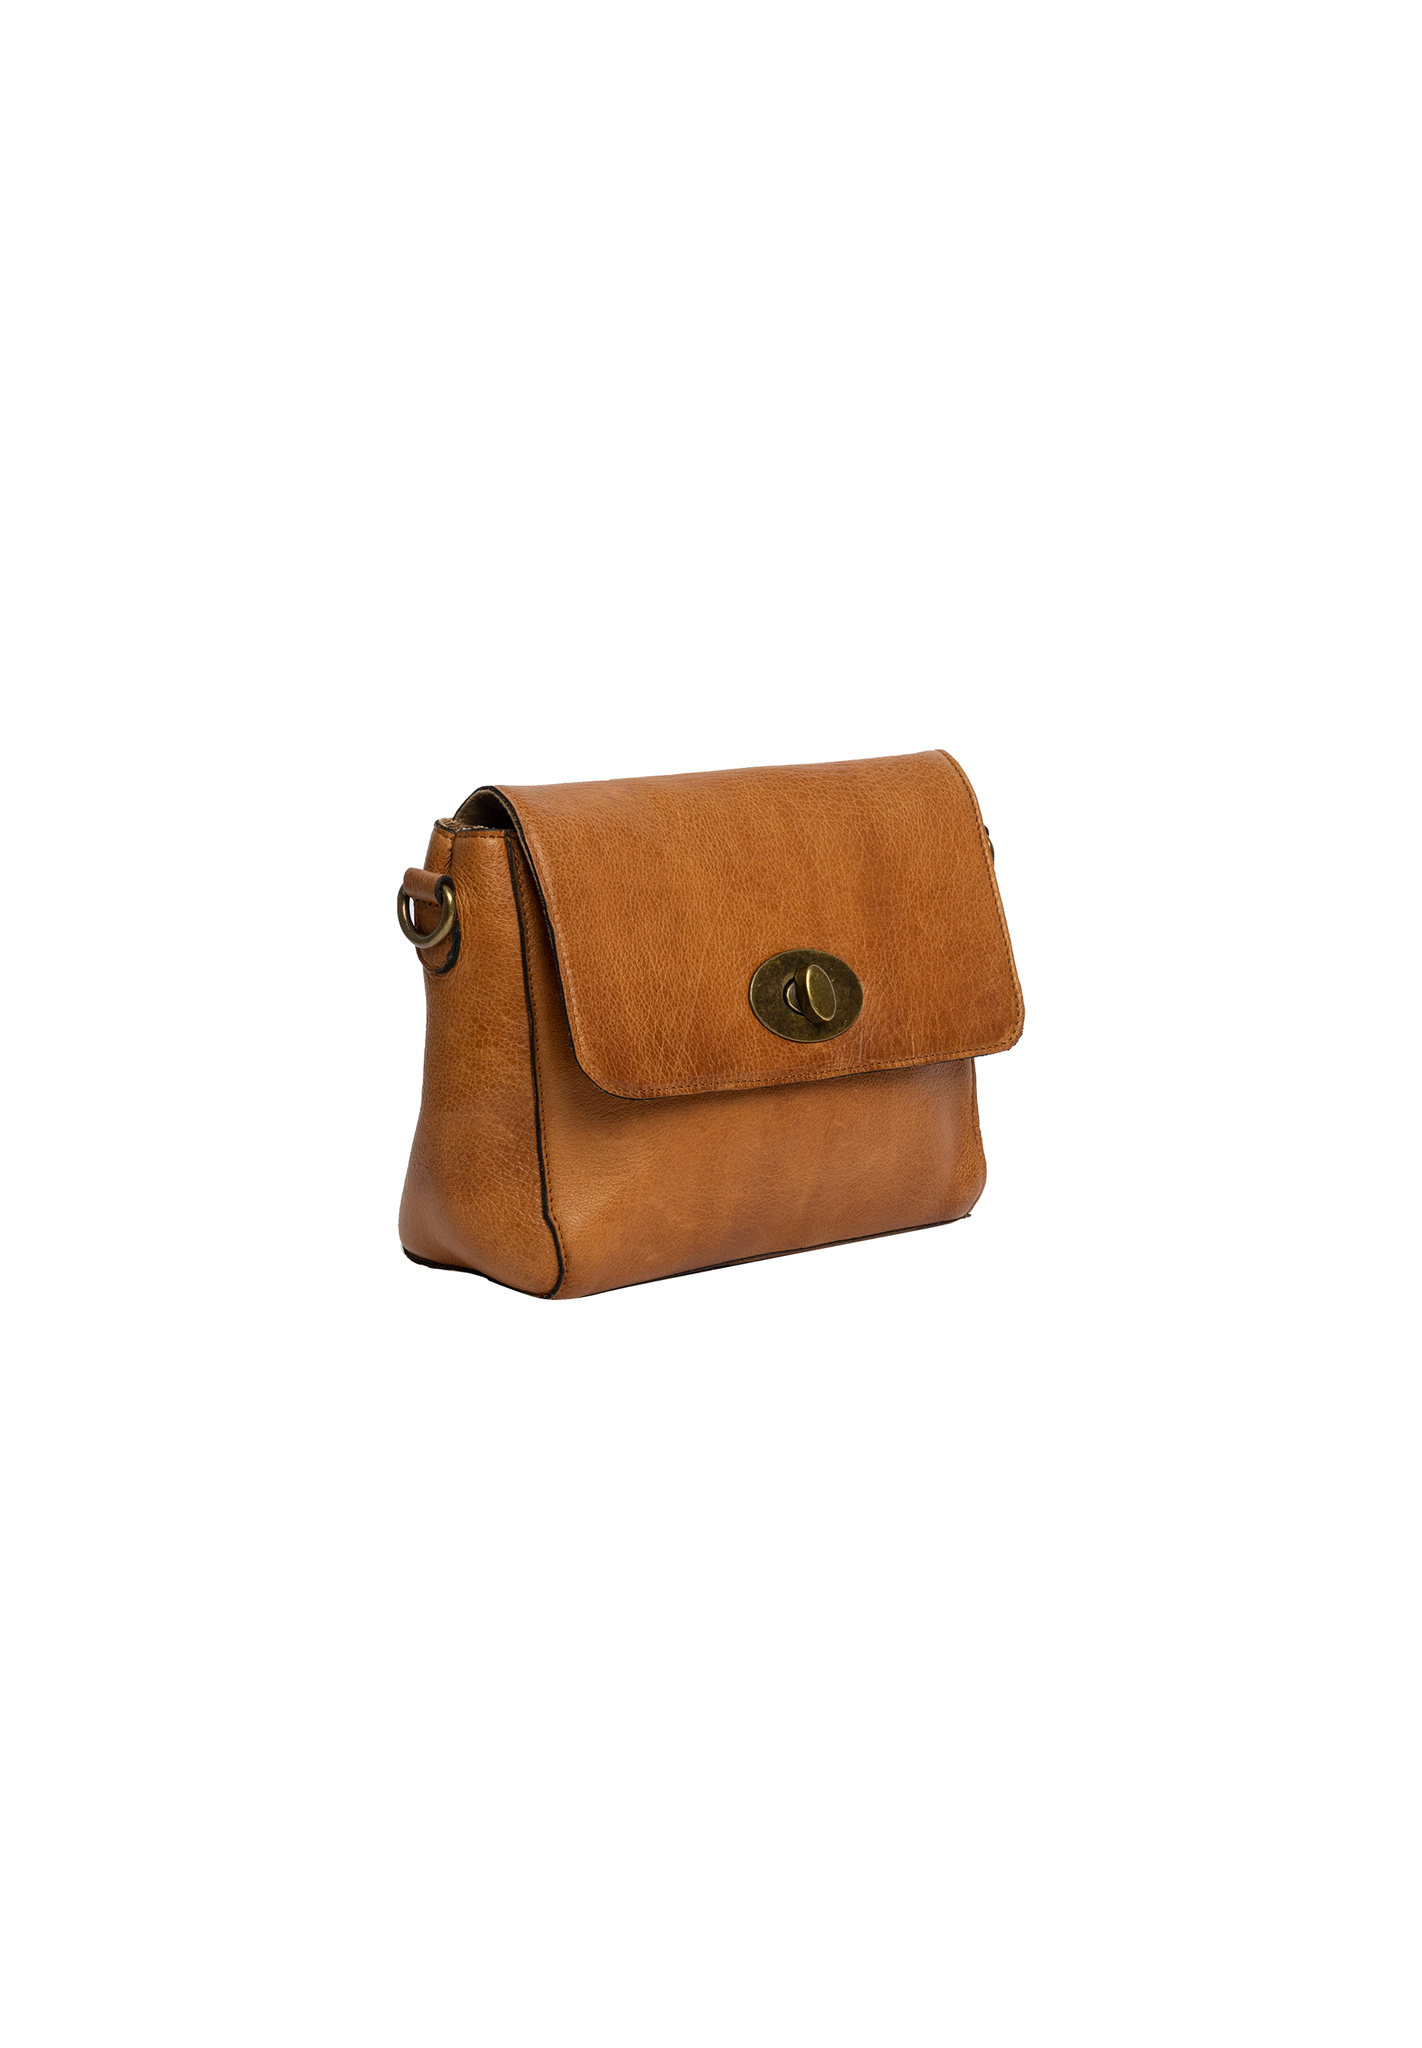 ReDesigned Catja Crossover M Bag Tan